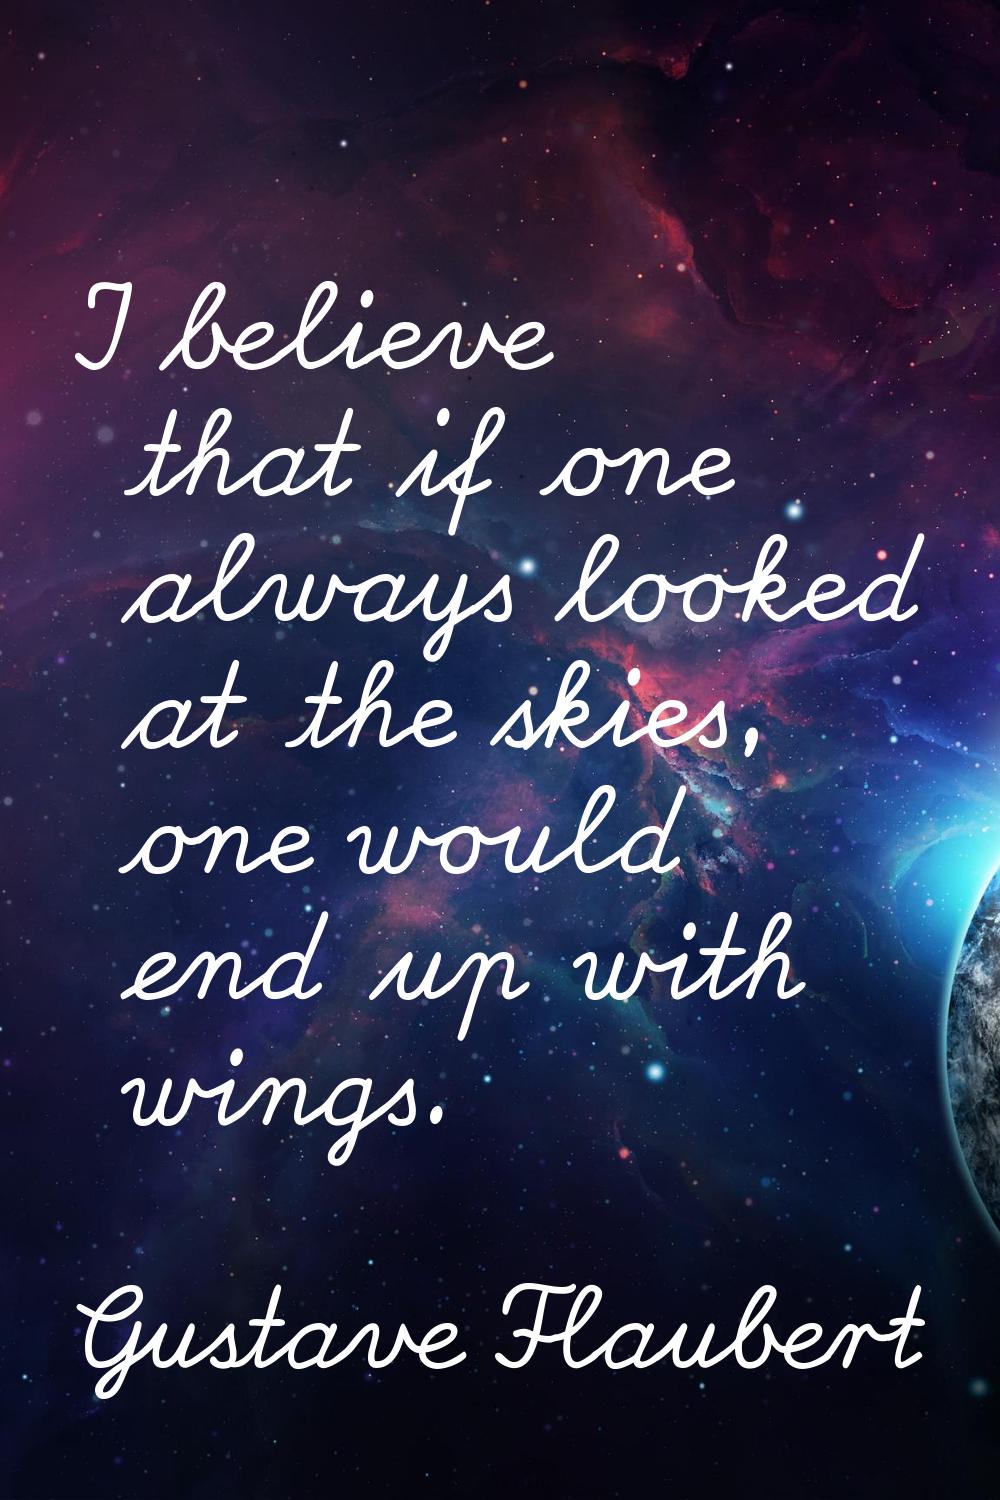 I believe that if one always looked at the skies, one would end up with wings.